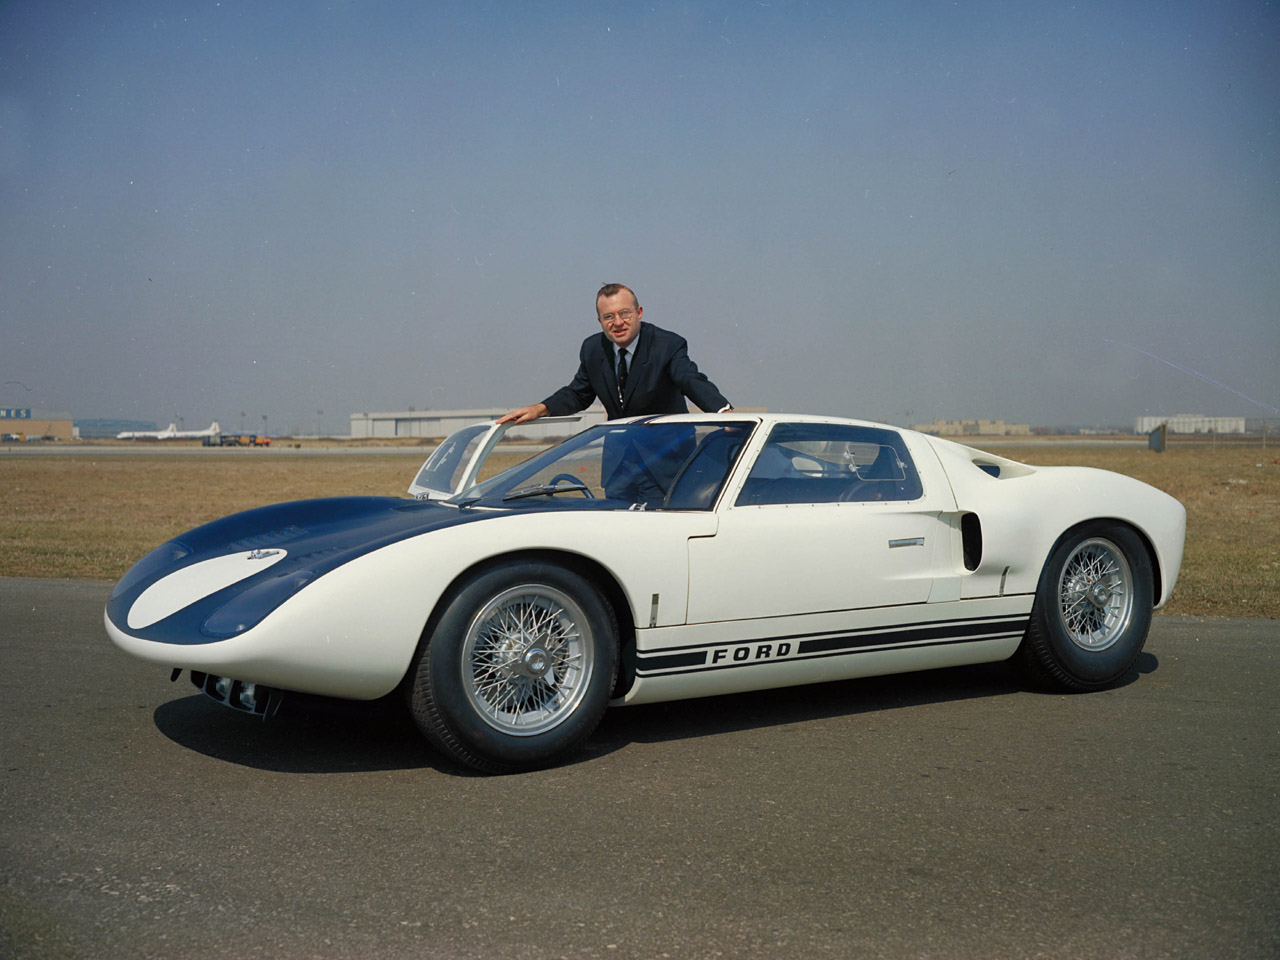 Ford GT Prototype, 1964